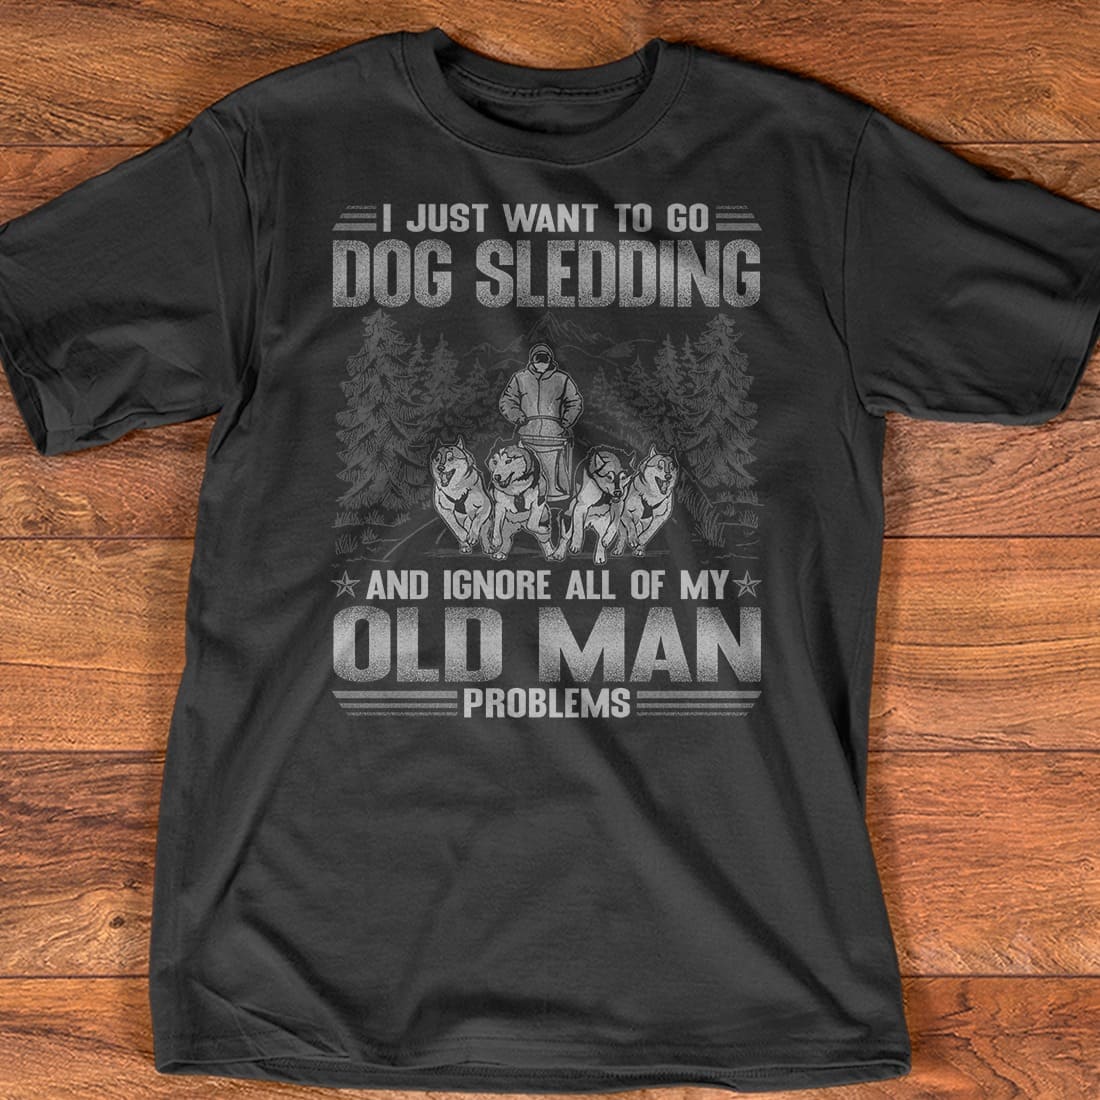 I just want to go dog sledding and ignore all of my old man problems - Dog sledding the hobby